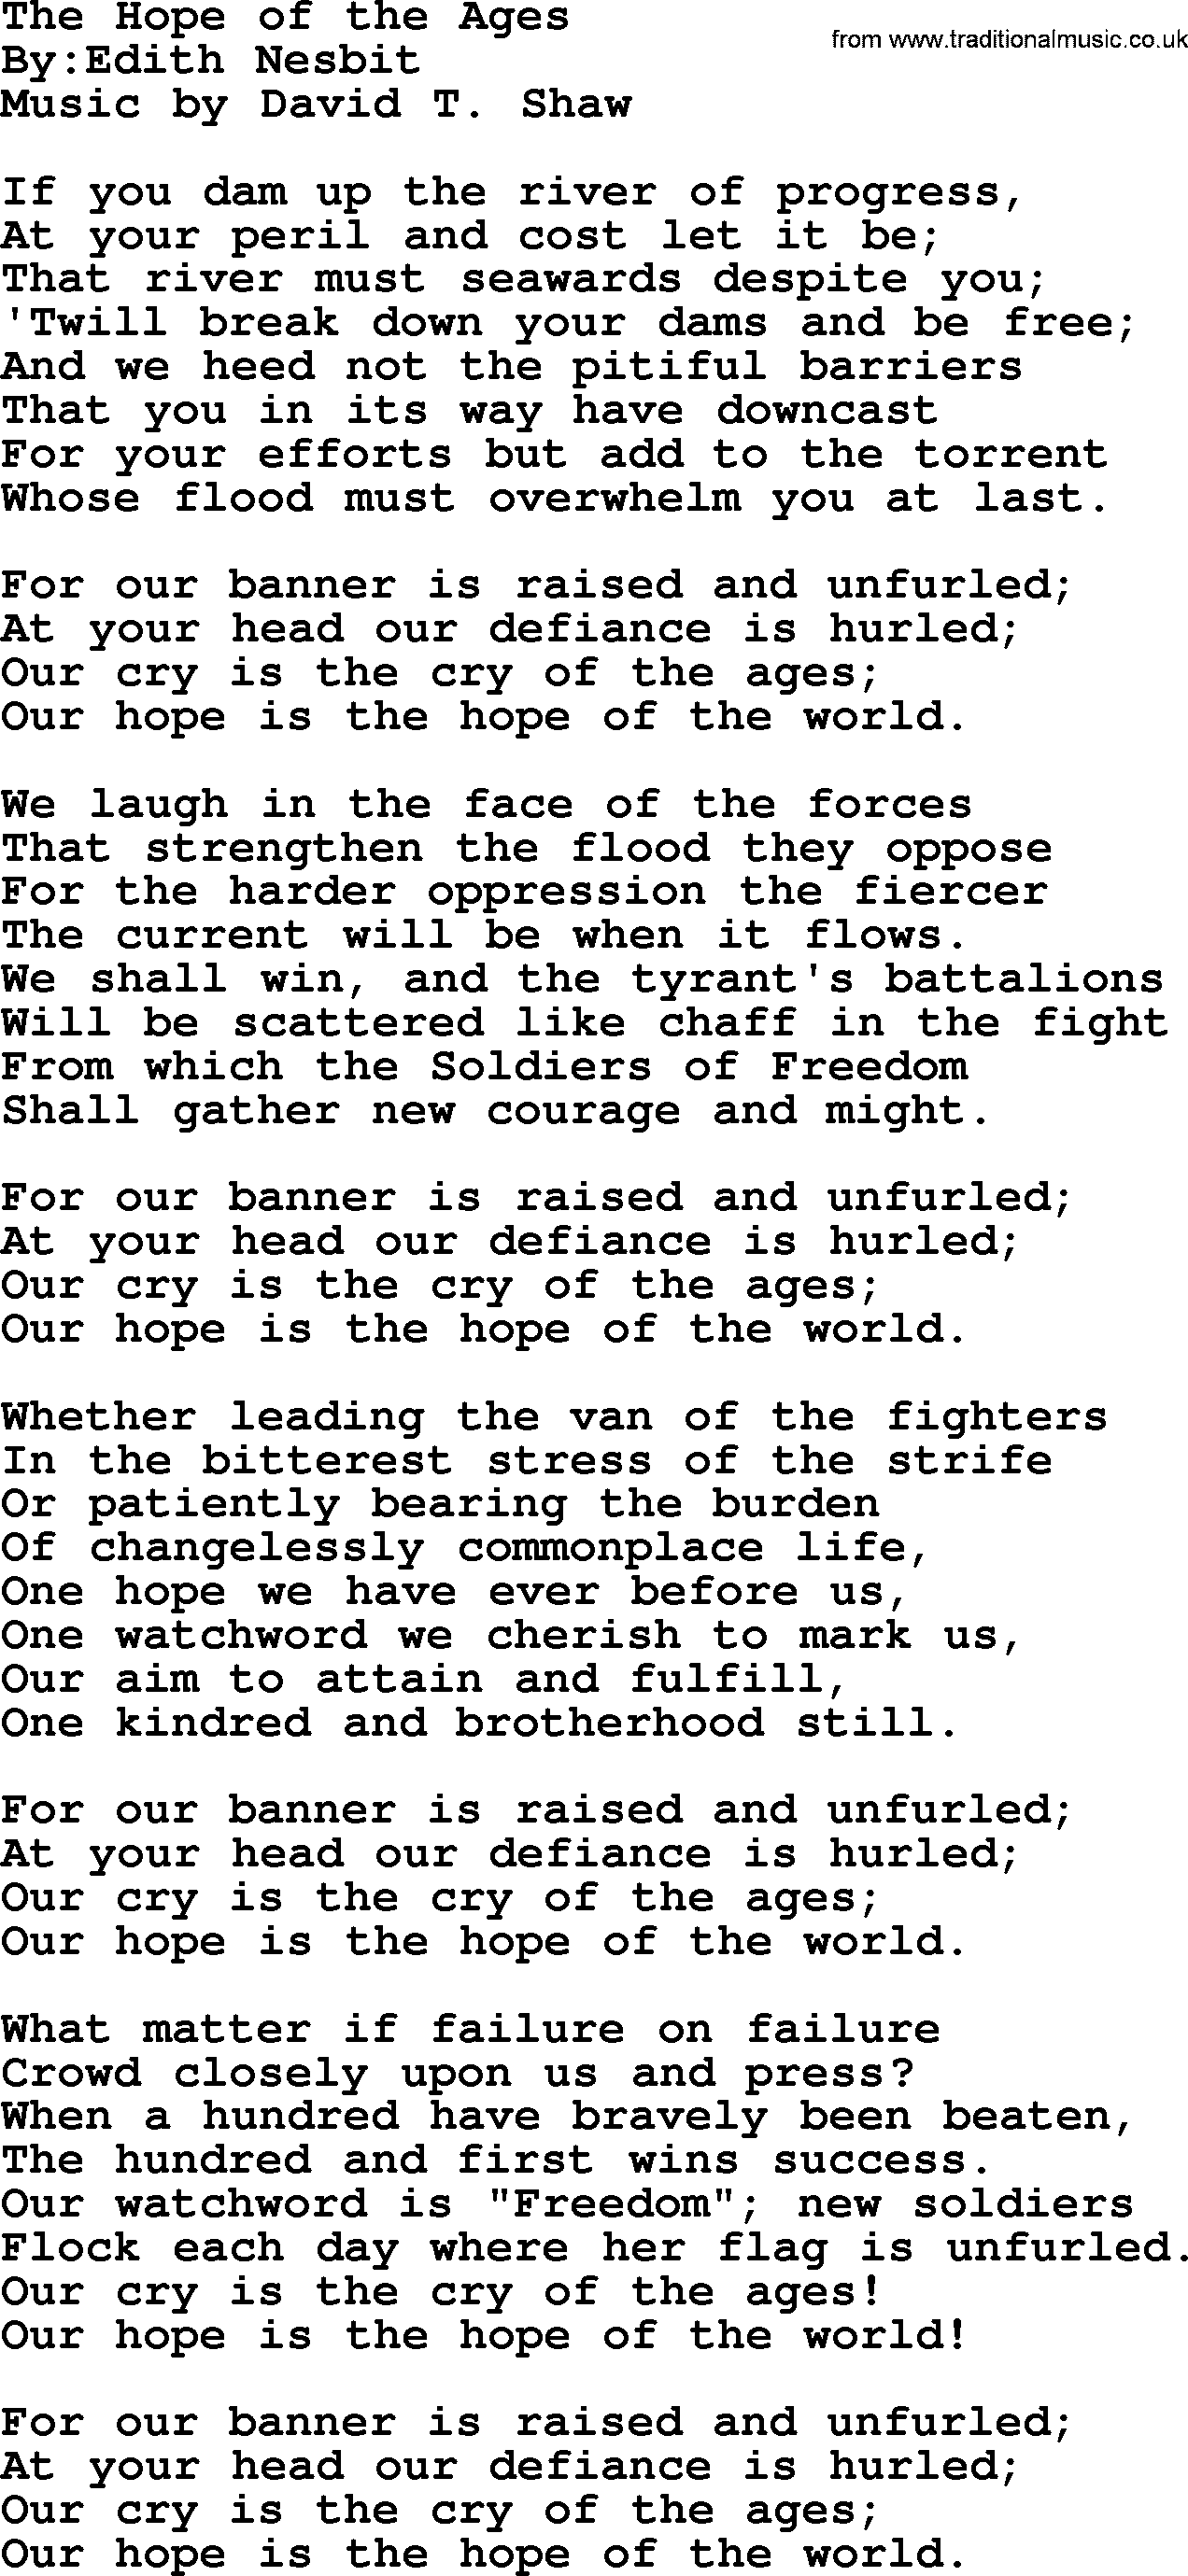 Political, Solidarity, Workers or Union song: The Hope Of The Ages, lyrics